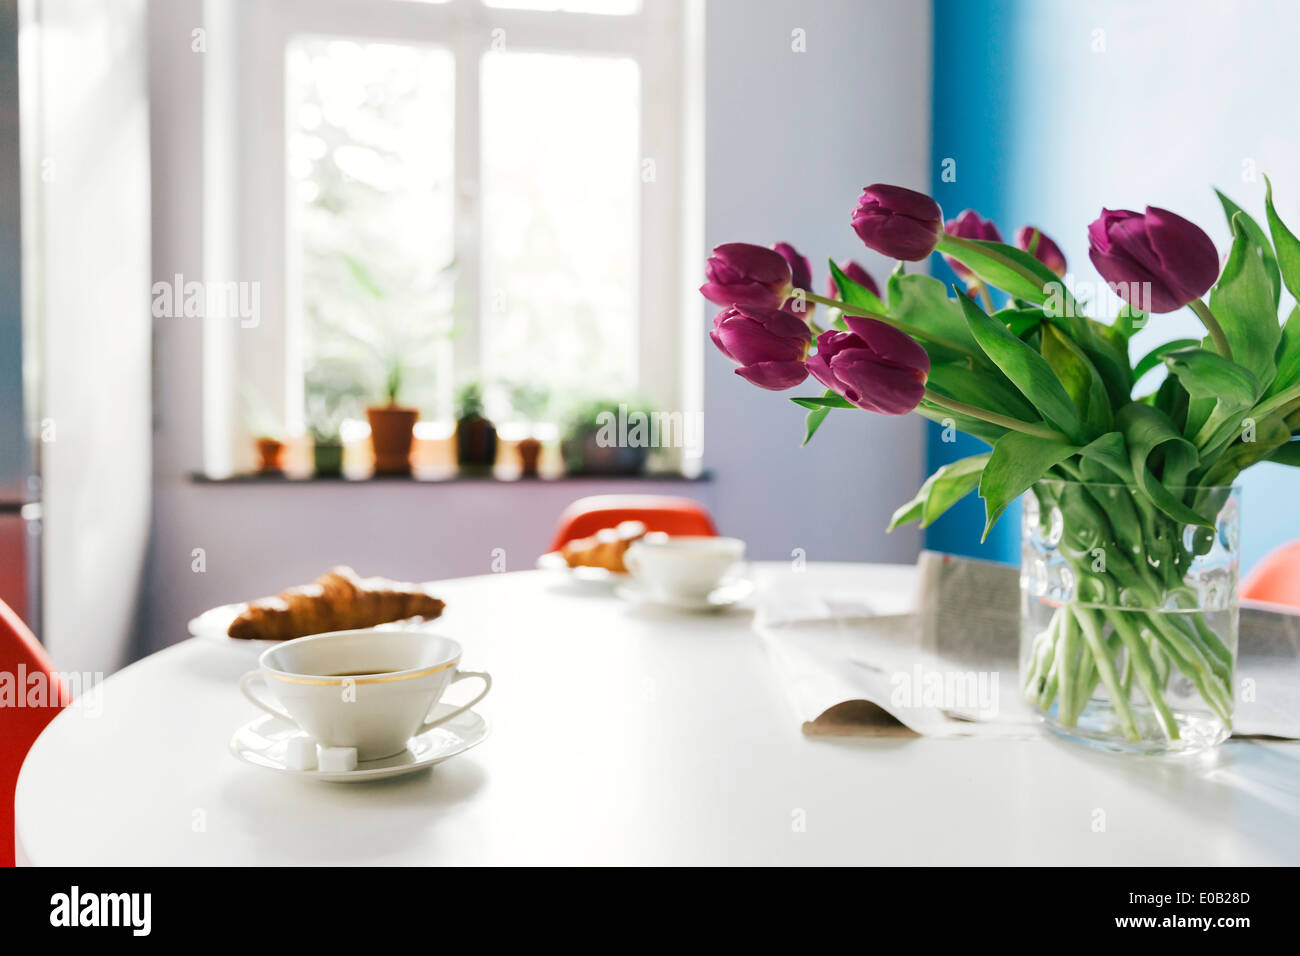 Breakfast table with tulips, croissants and cups of coffee Stock Photo